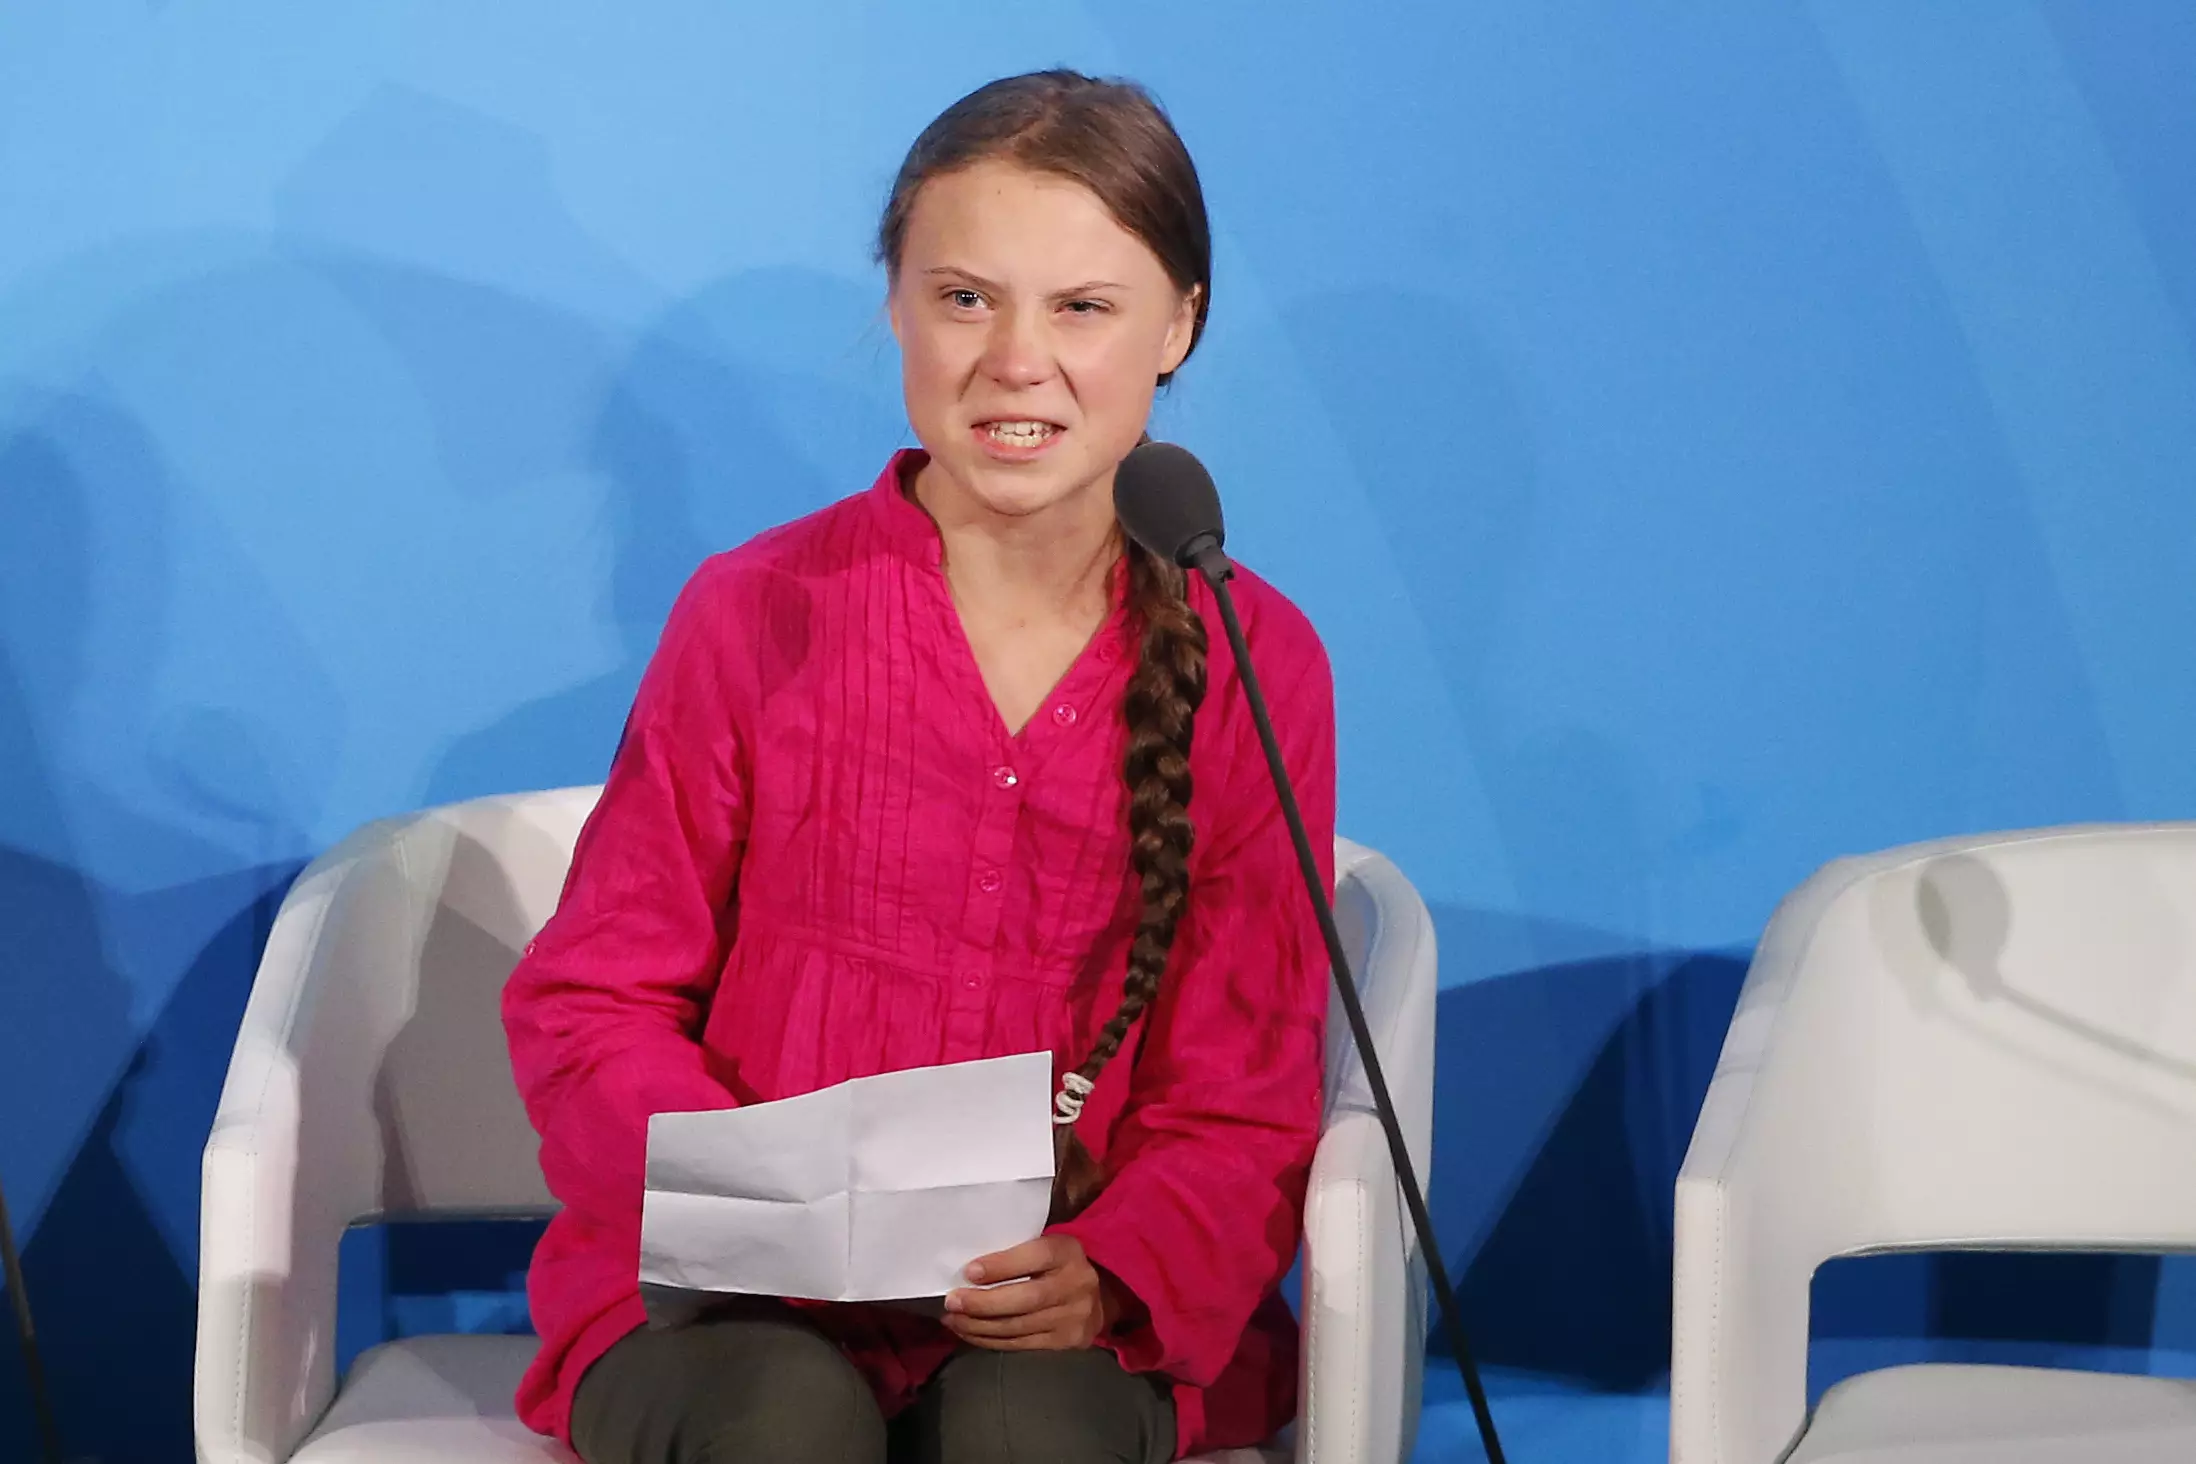 Greta speaking at a UN conference last week.